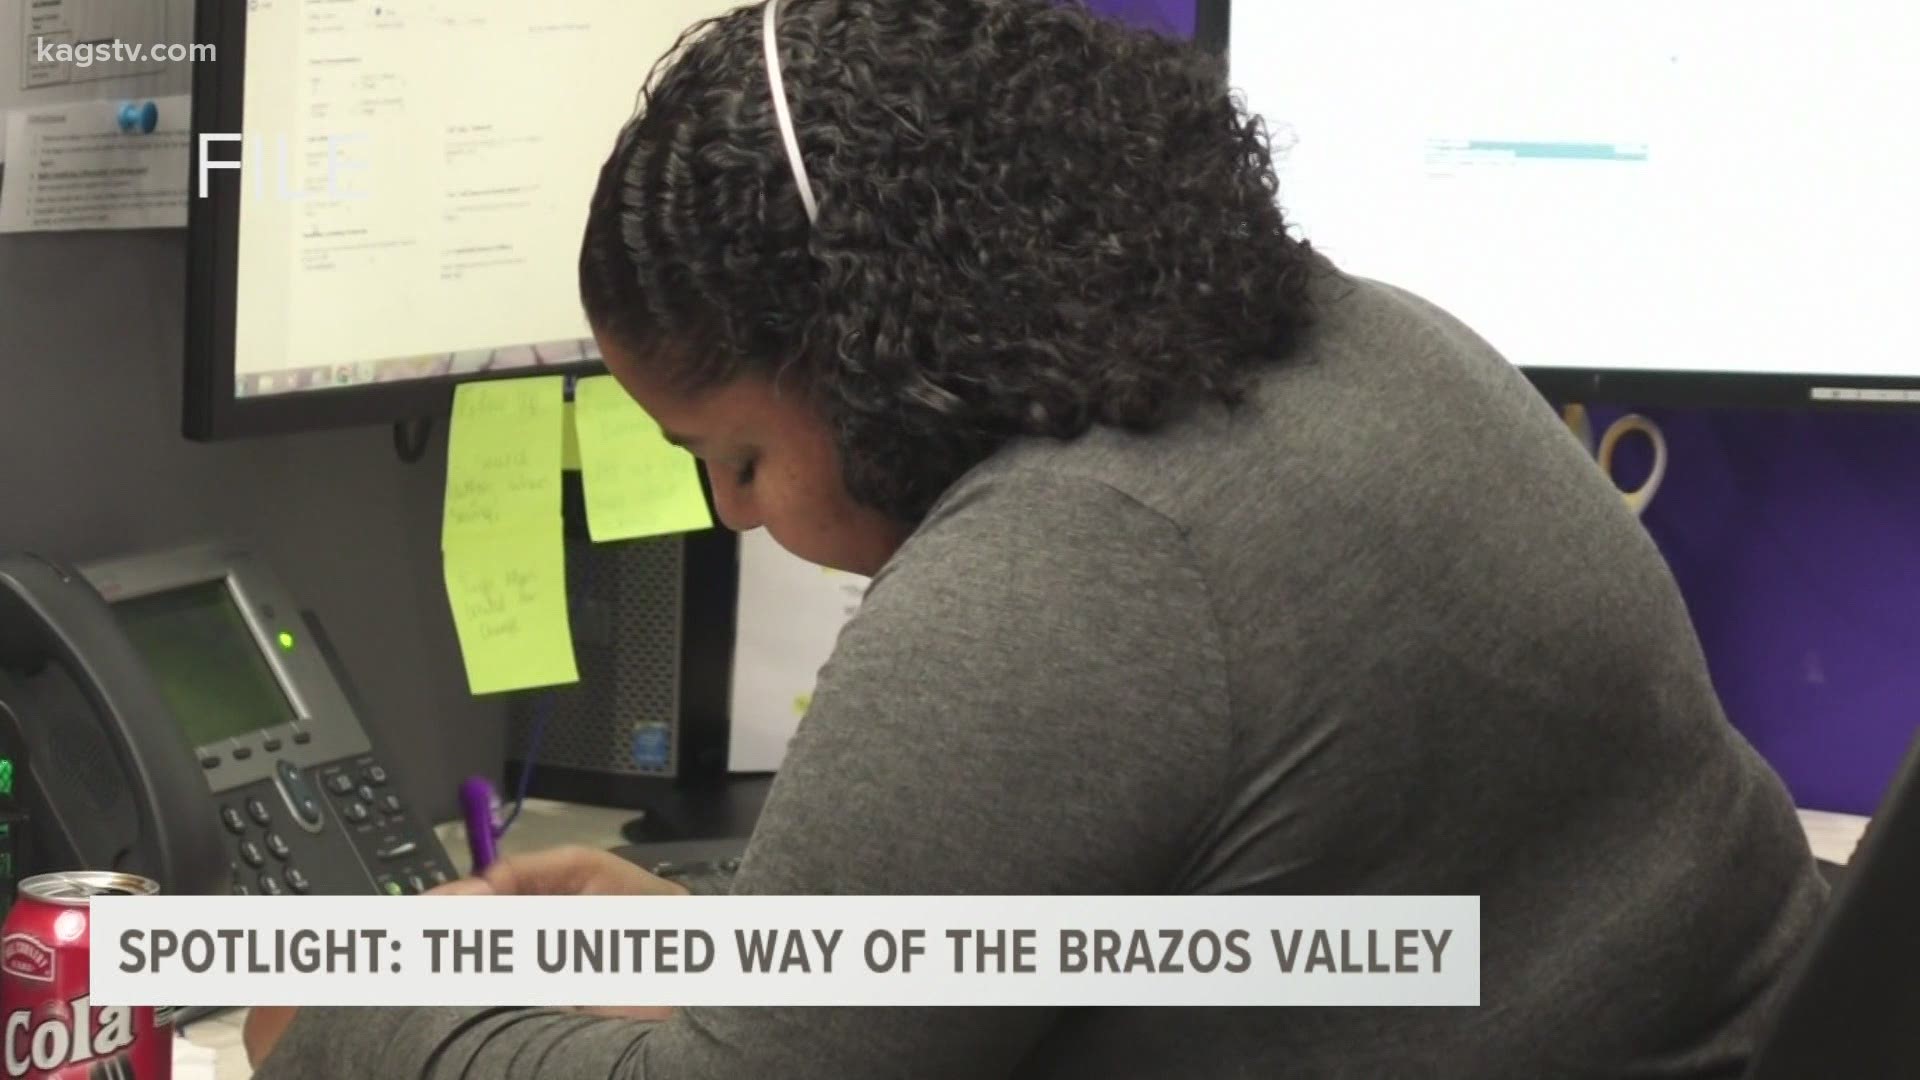 The United Way of the Brazos Valley faced a challenging year, but were able to raise funds and save the jobs of several area workers.